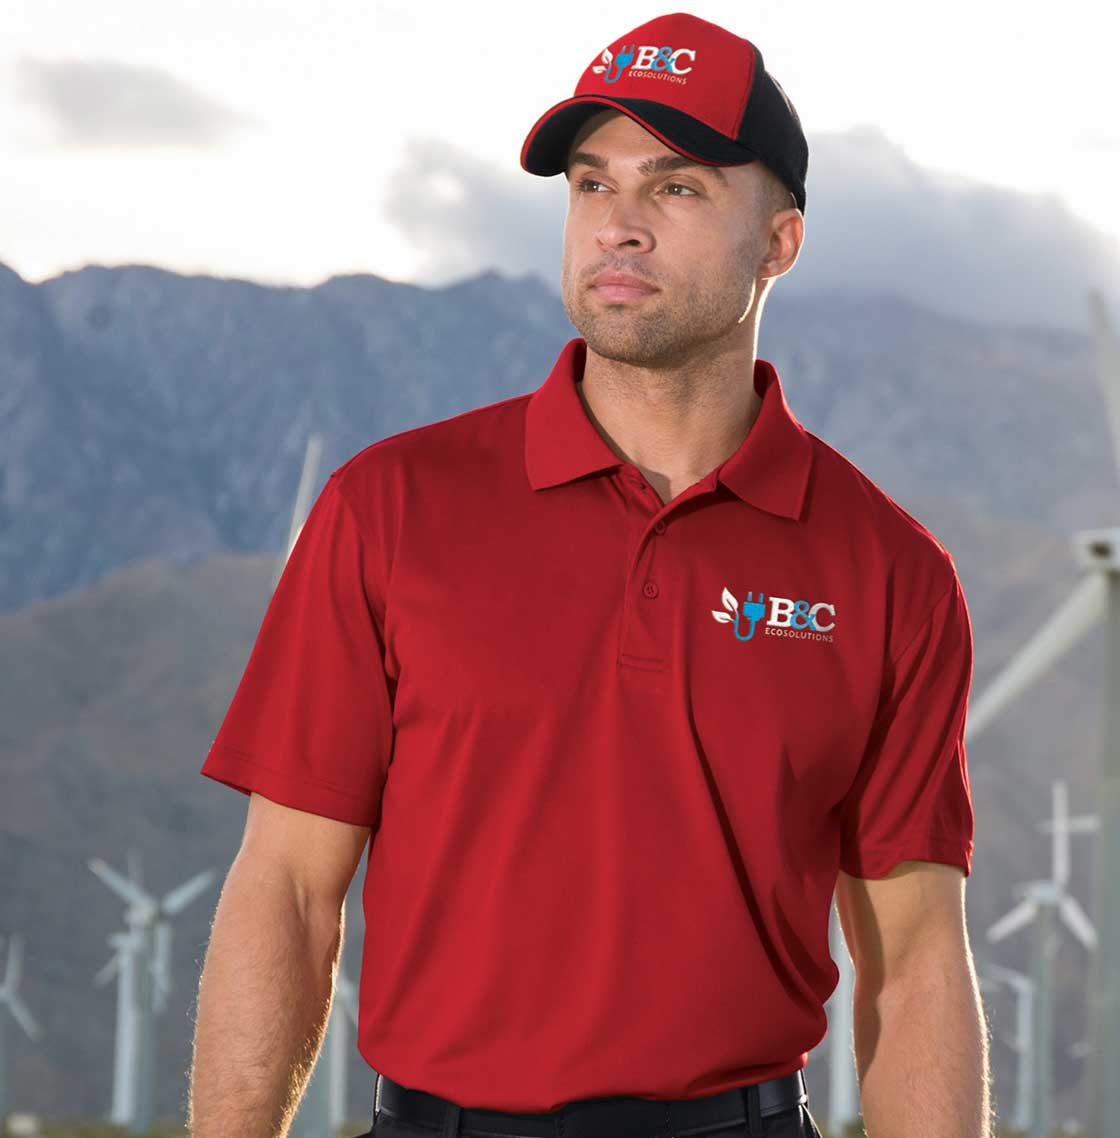 Man wearing hat and polo shirt featuring embroidered logos